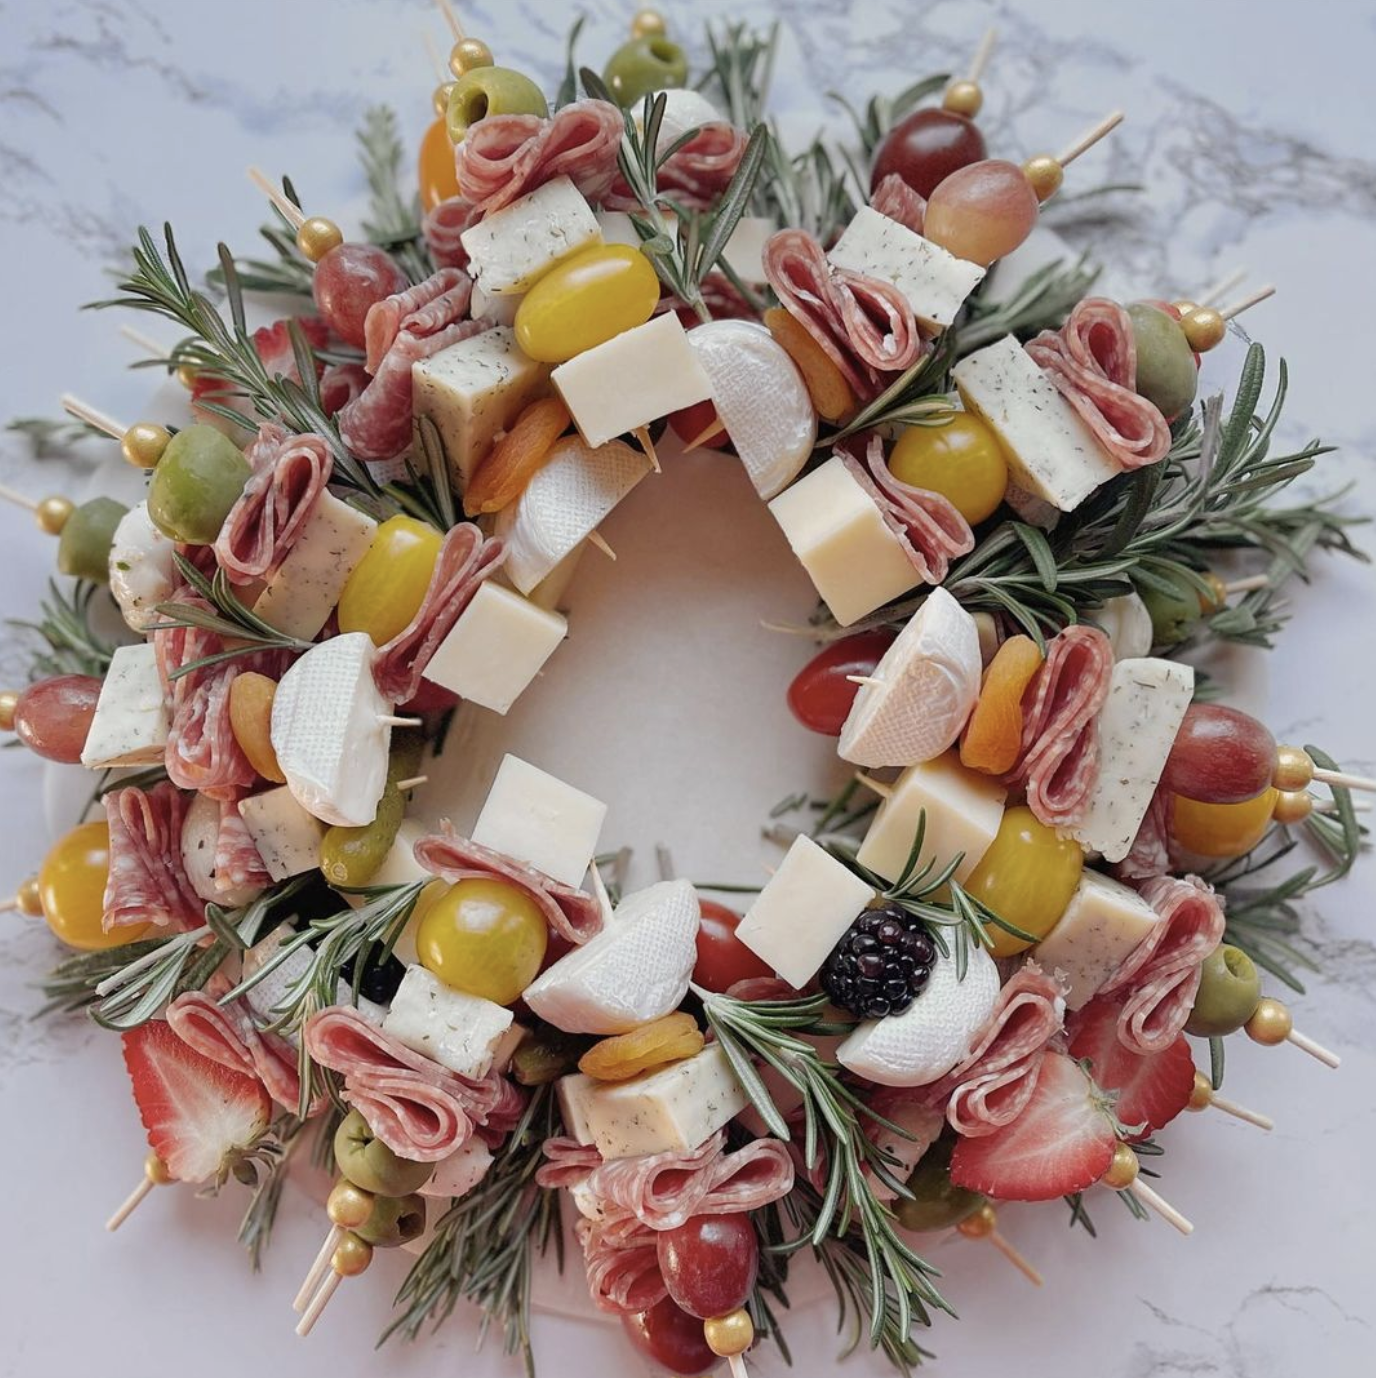 Love this festive charcuterie board wreath with individual skewers 